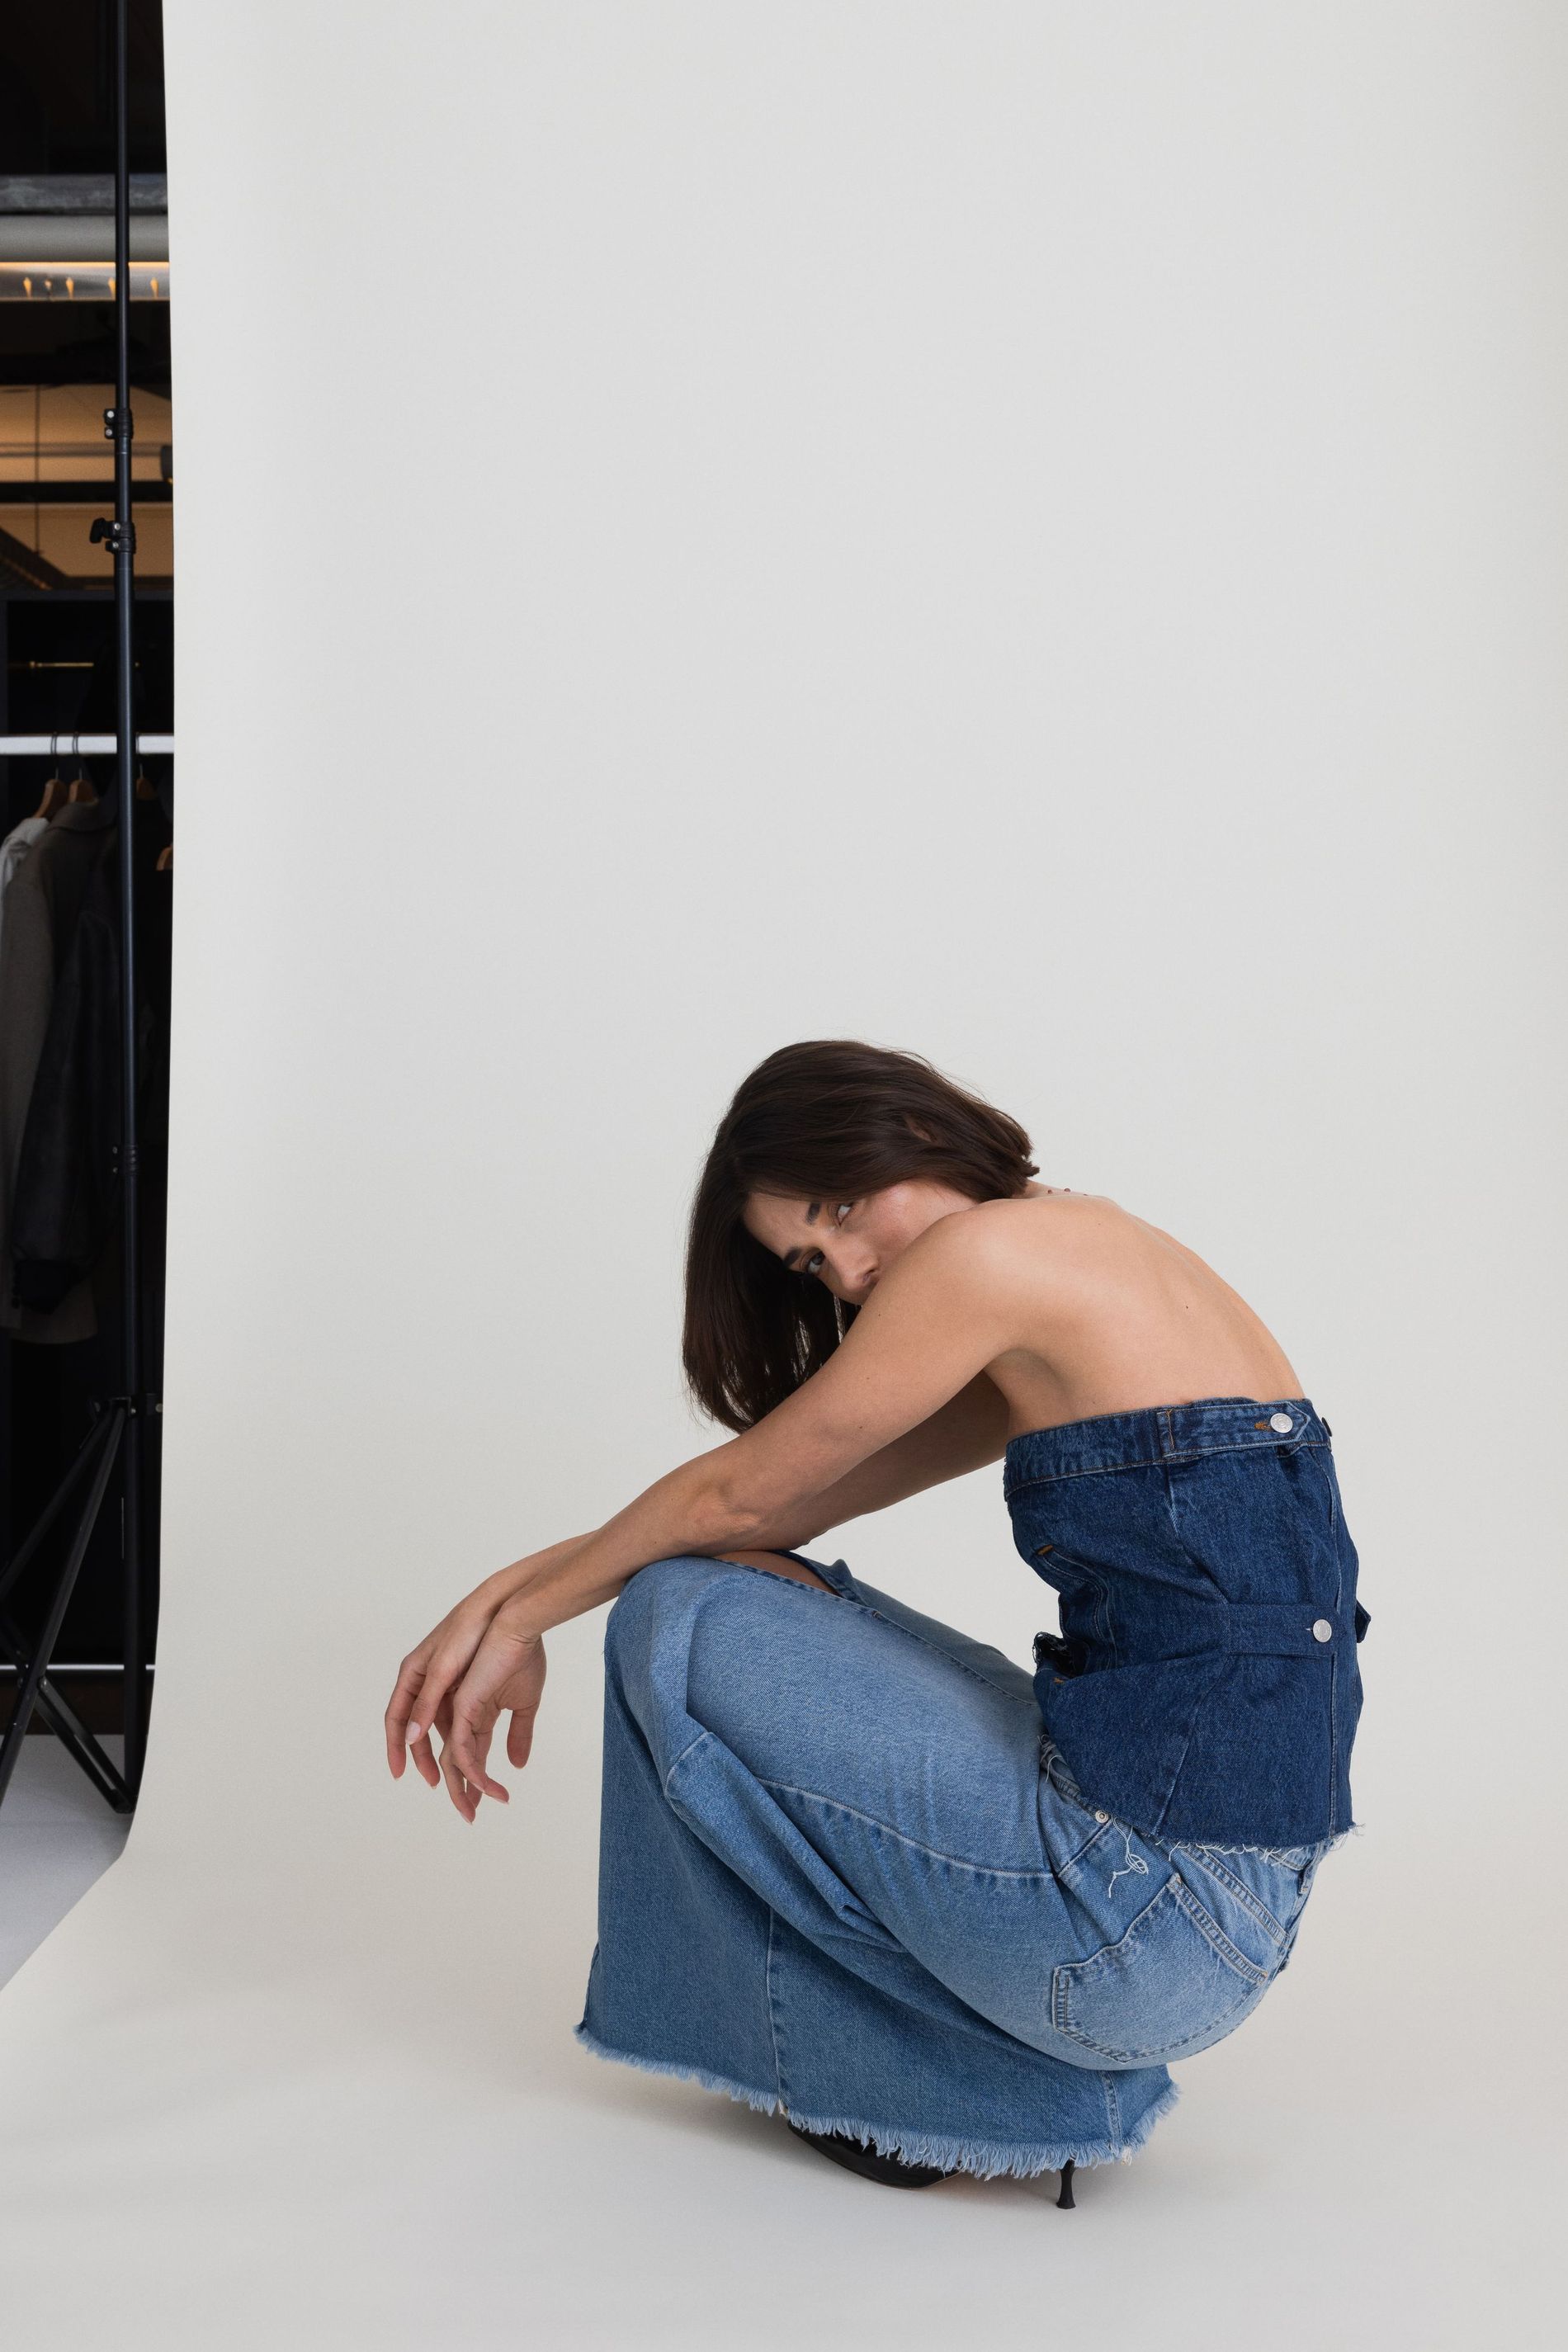 Model poses with remade denim pieces